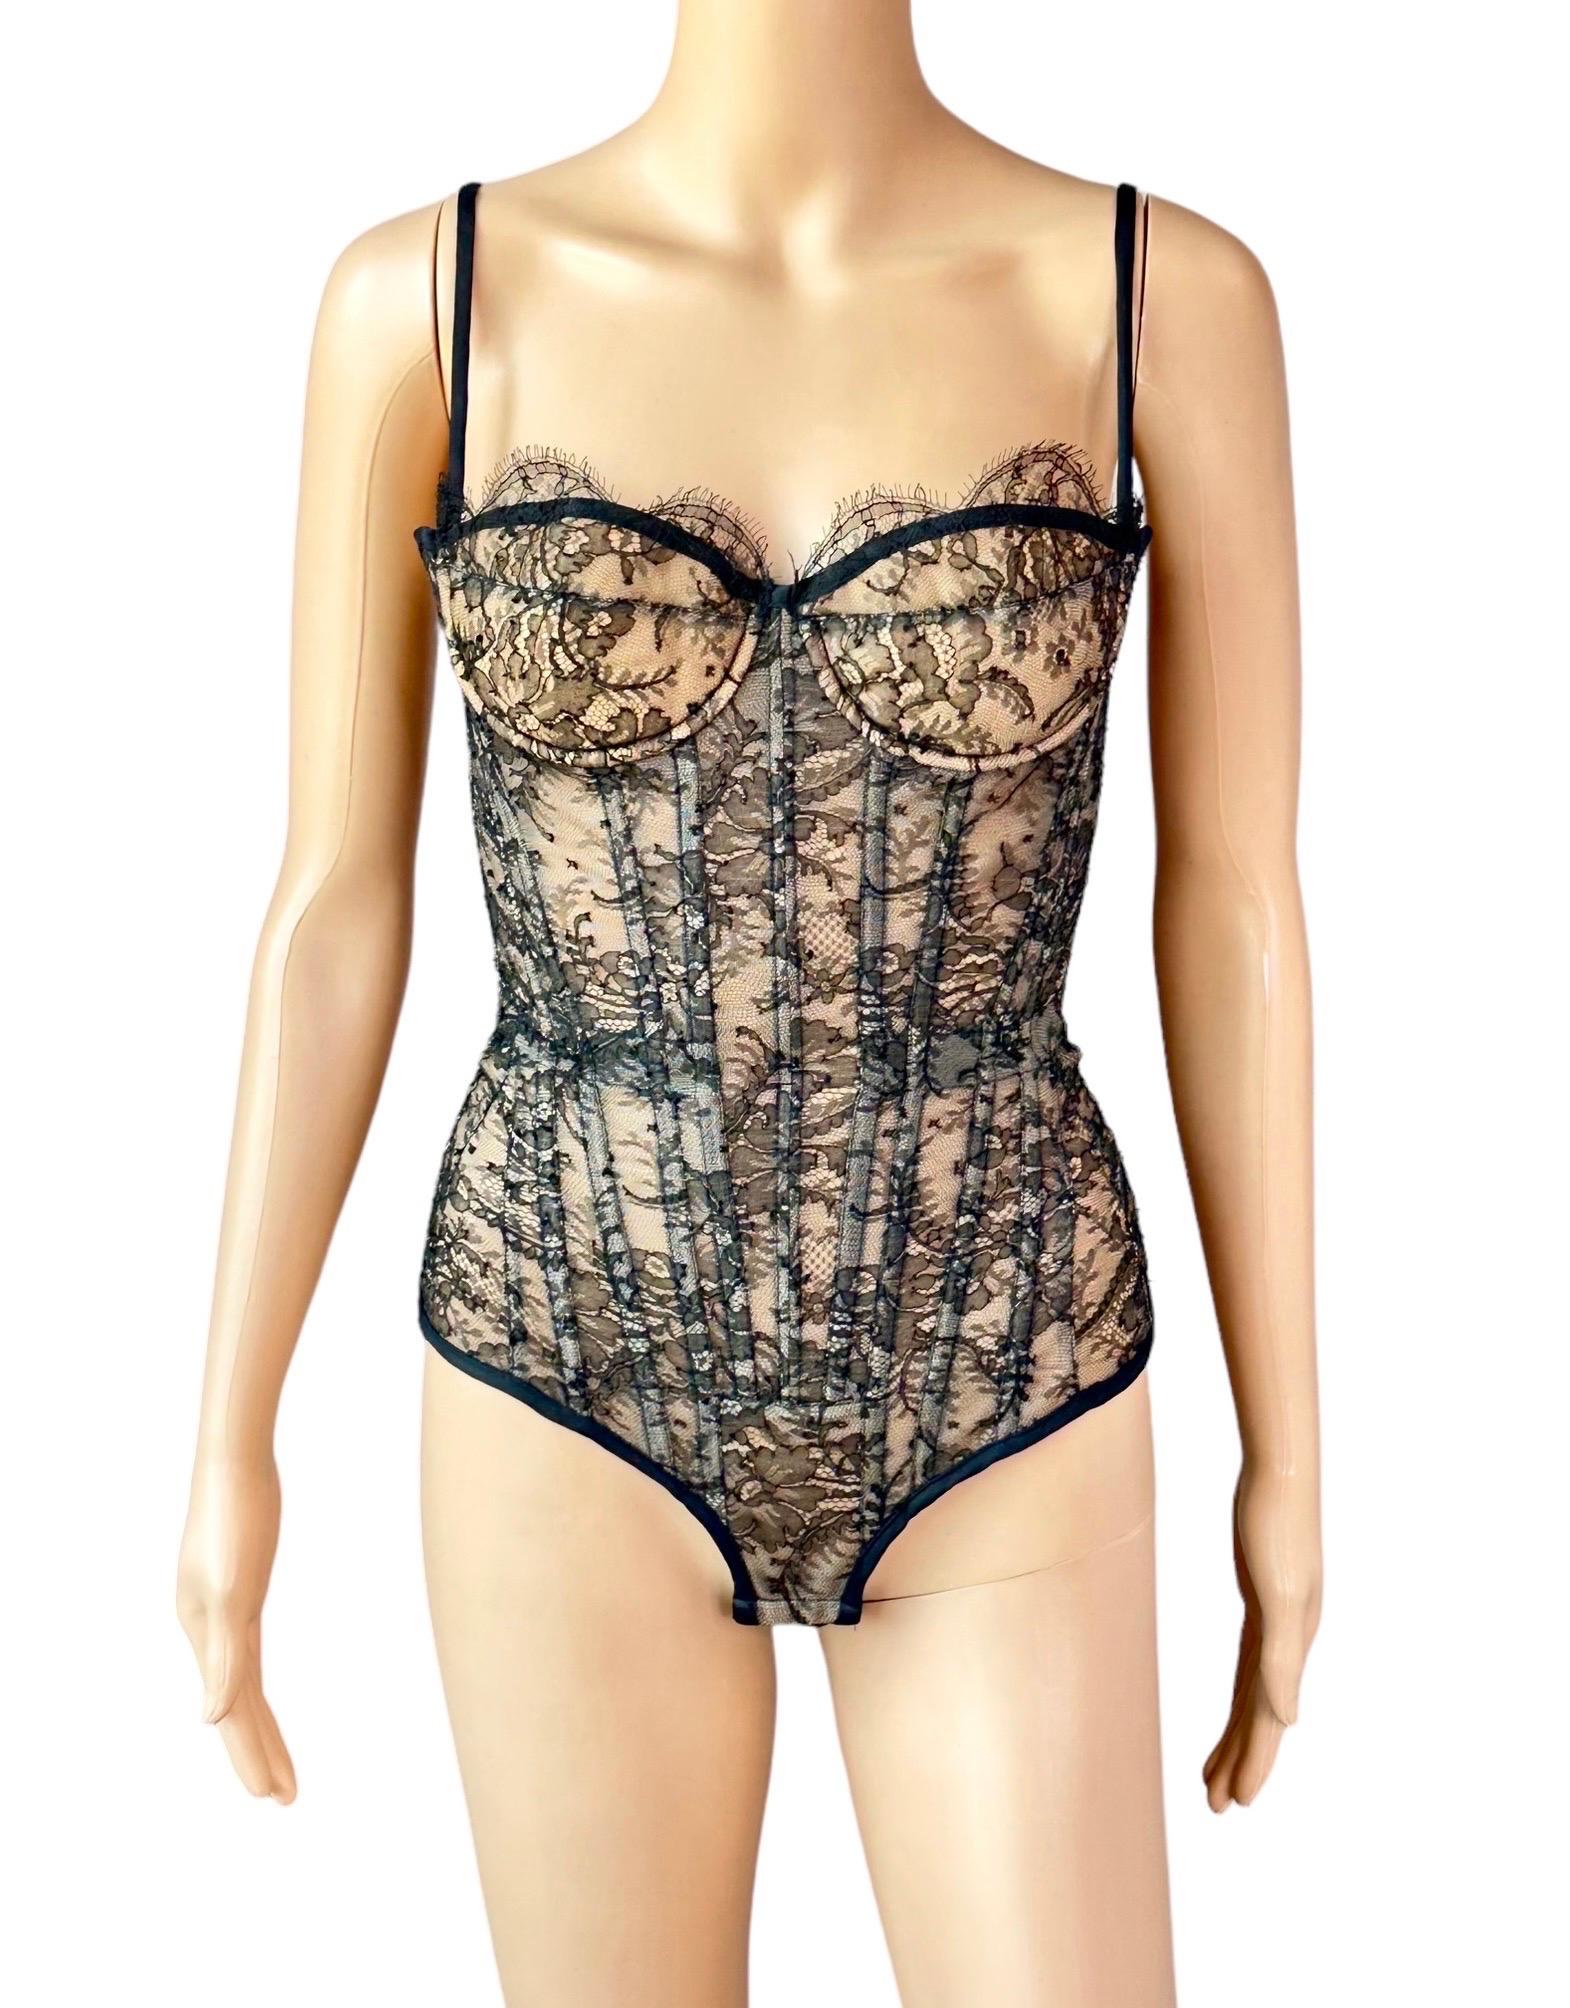 Roberto Cavalli S/S 2003 Bustier Lace-Up Corset Sheer Lace Black Bodysuit Top In Excellent Condition For Sale In Naples, FL